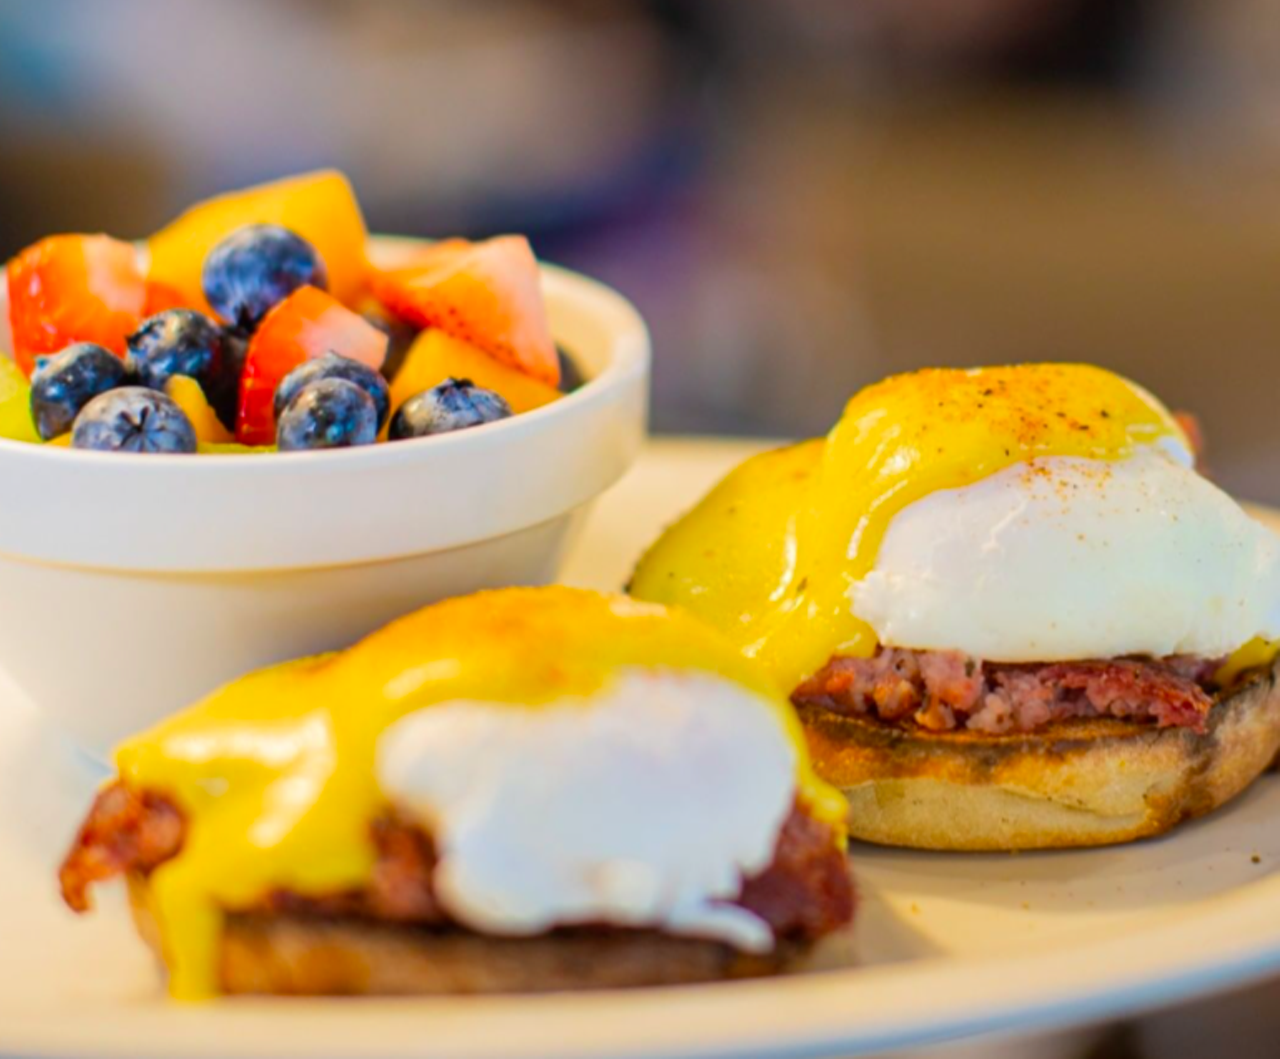 Eggs Up Grill
13750 W. Colonial Drive Suite 130, Winter Garden, 407-347-9140
Eggs Up’s massive menu has nearly every breakfast item imaginable, ranging from home-fry bowls to waffles. Their eggs benedict is a crowd favorite, topped with Canadian bacon, poached eggs and hollandaise sauce.